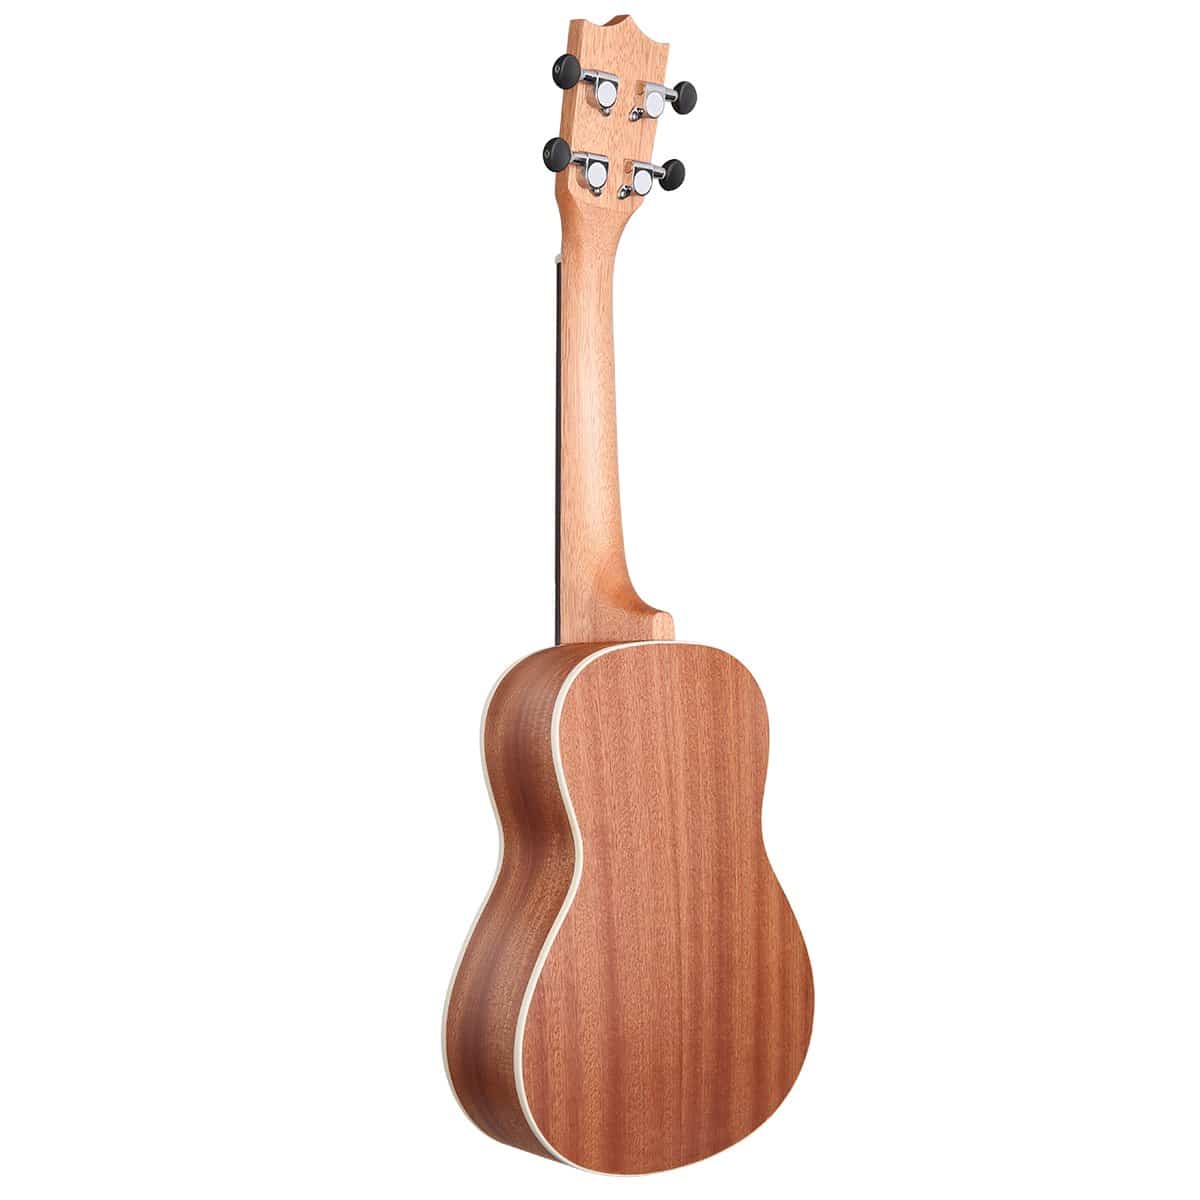 10 Best Concert Ukuleles Reviewed in Detail [May 2022]